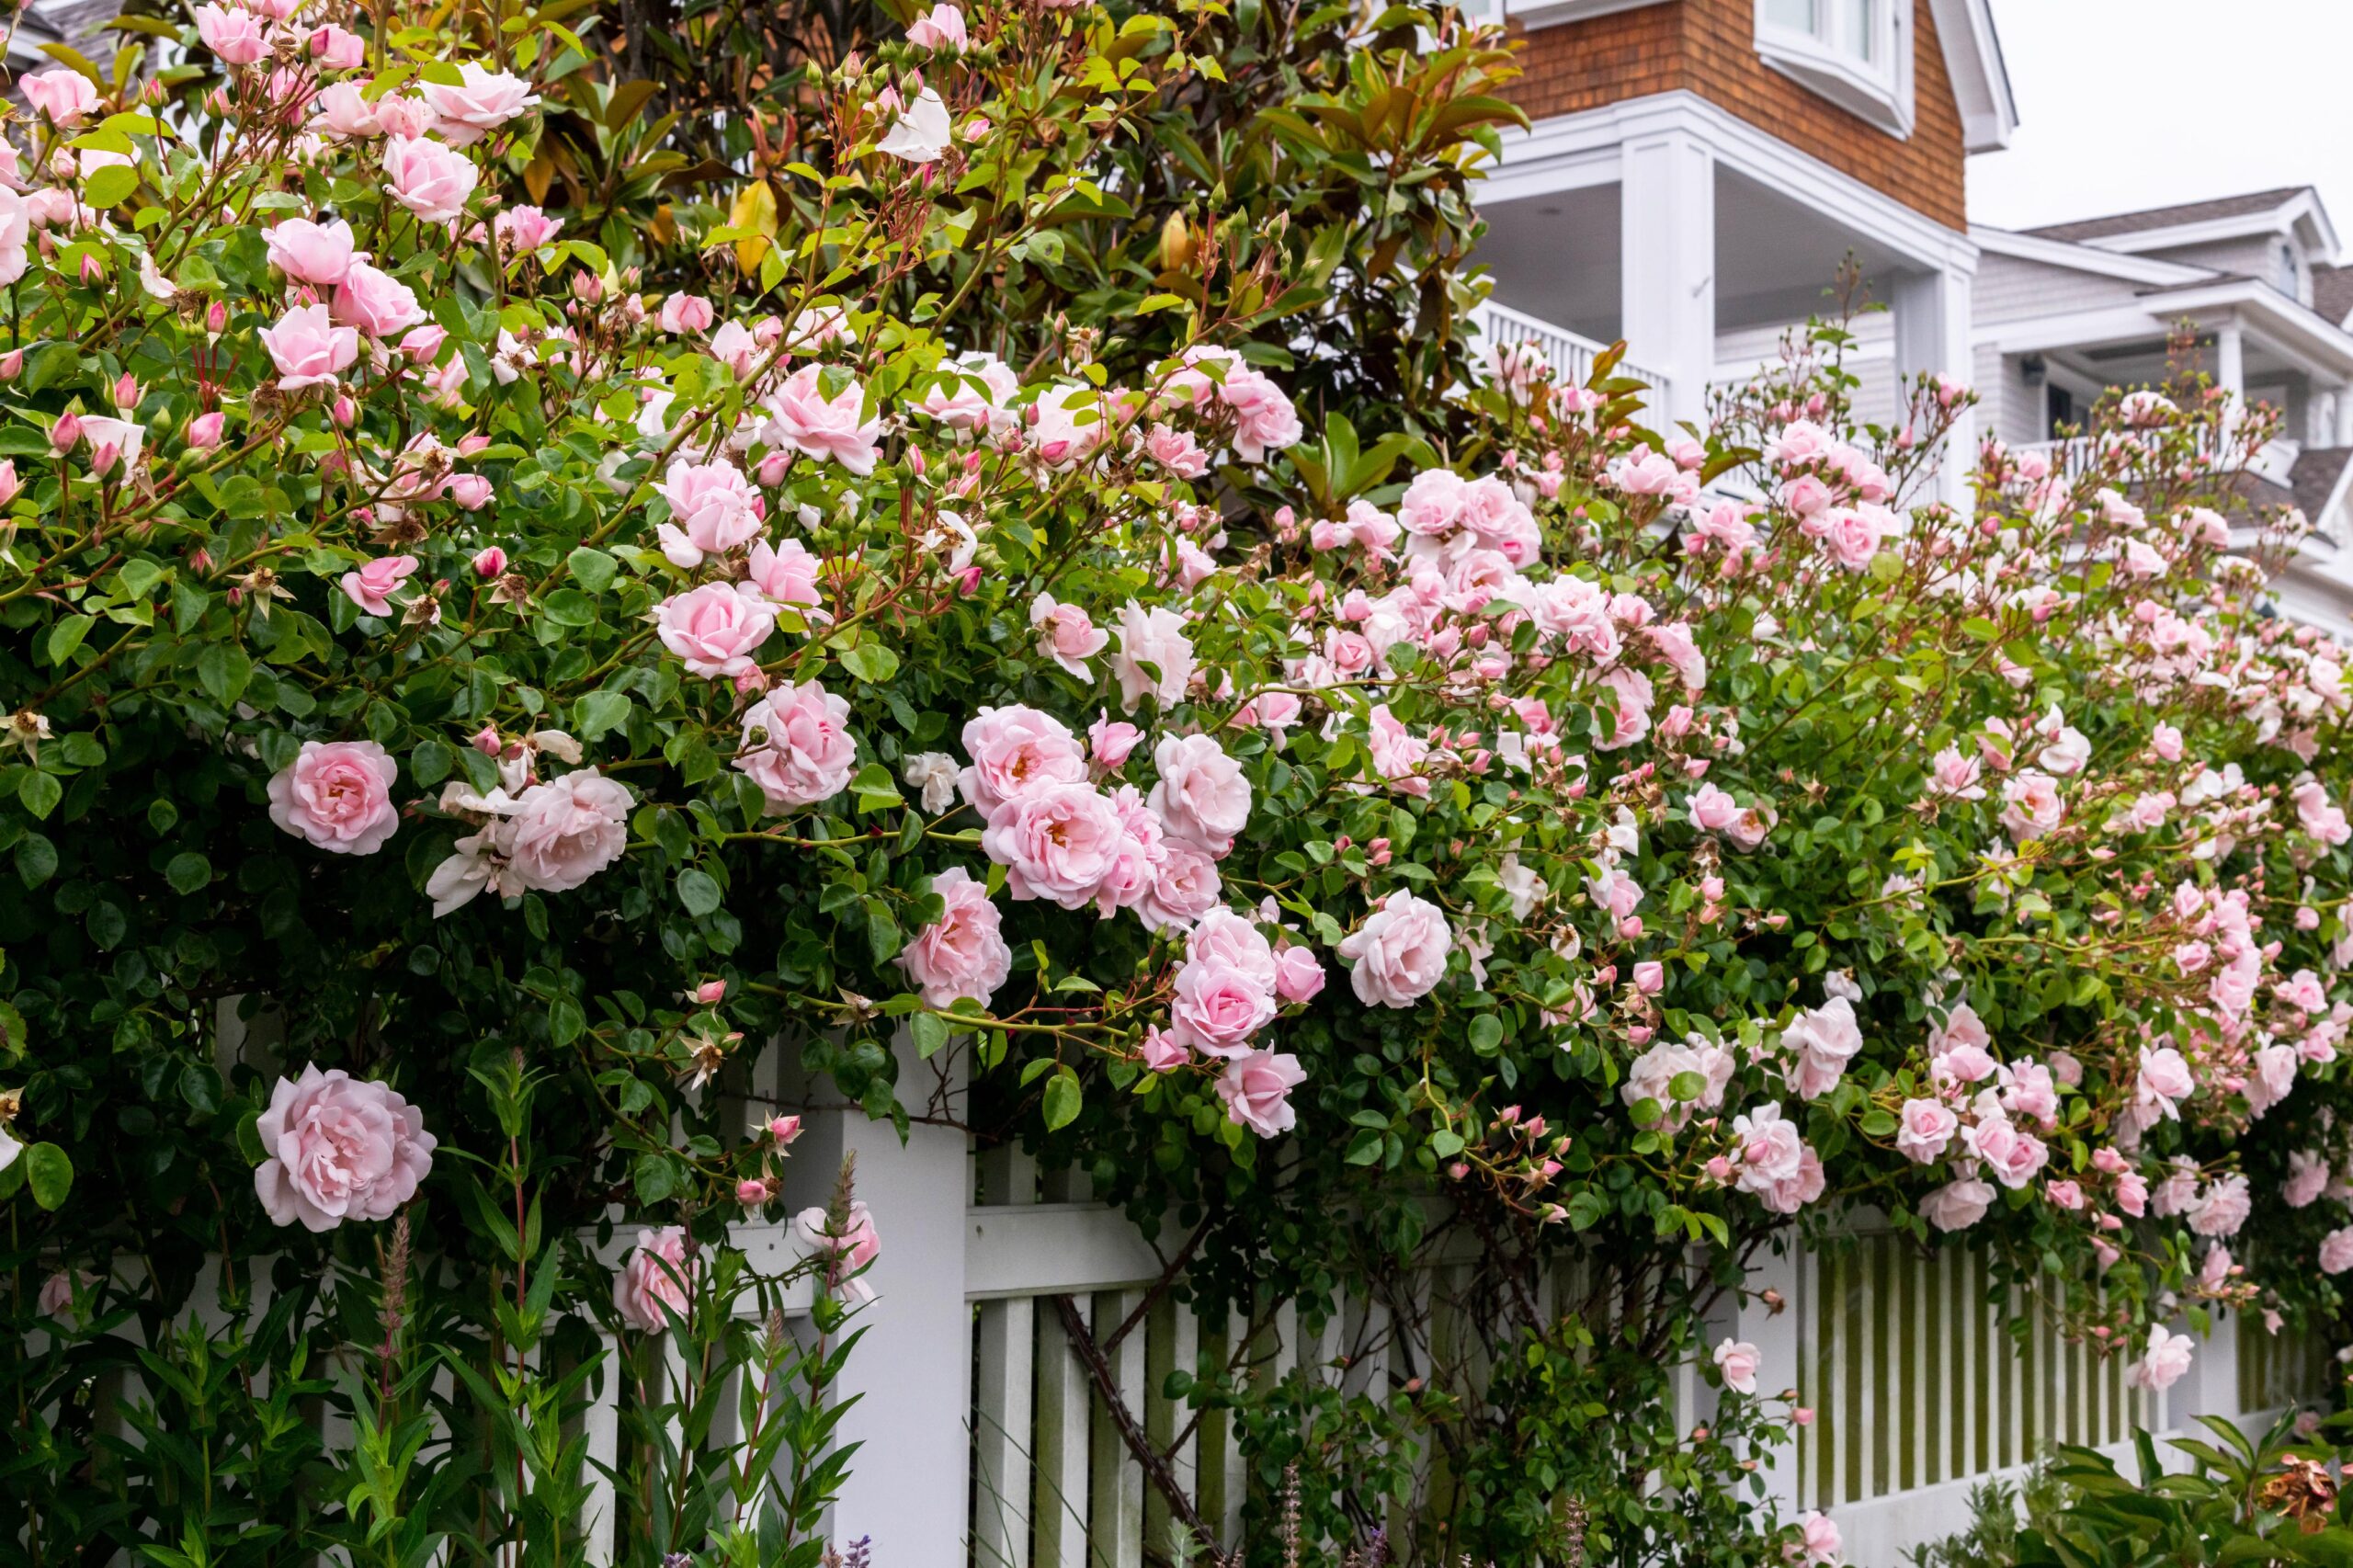 Pink roses growing along a white fence with a beach house in the background on a cloudy day